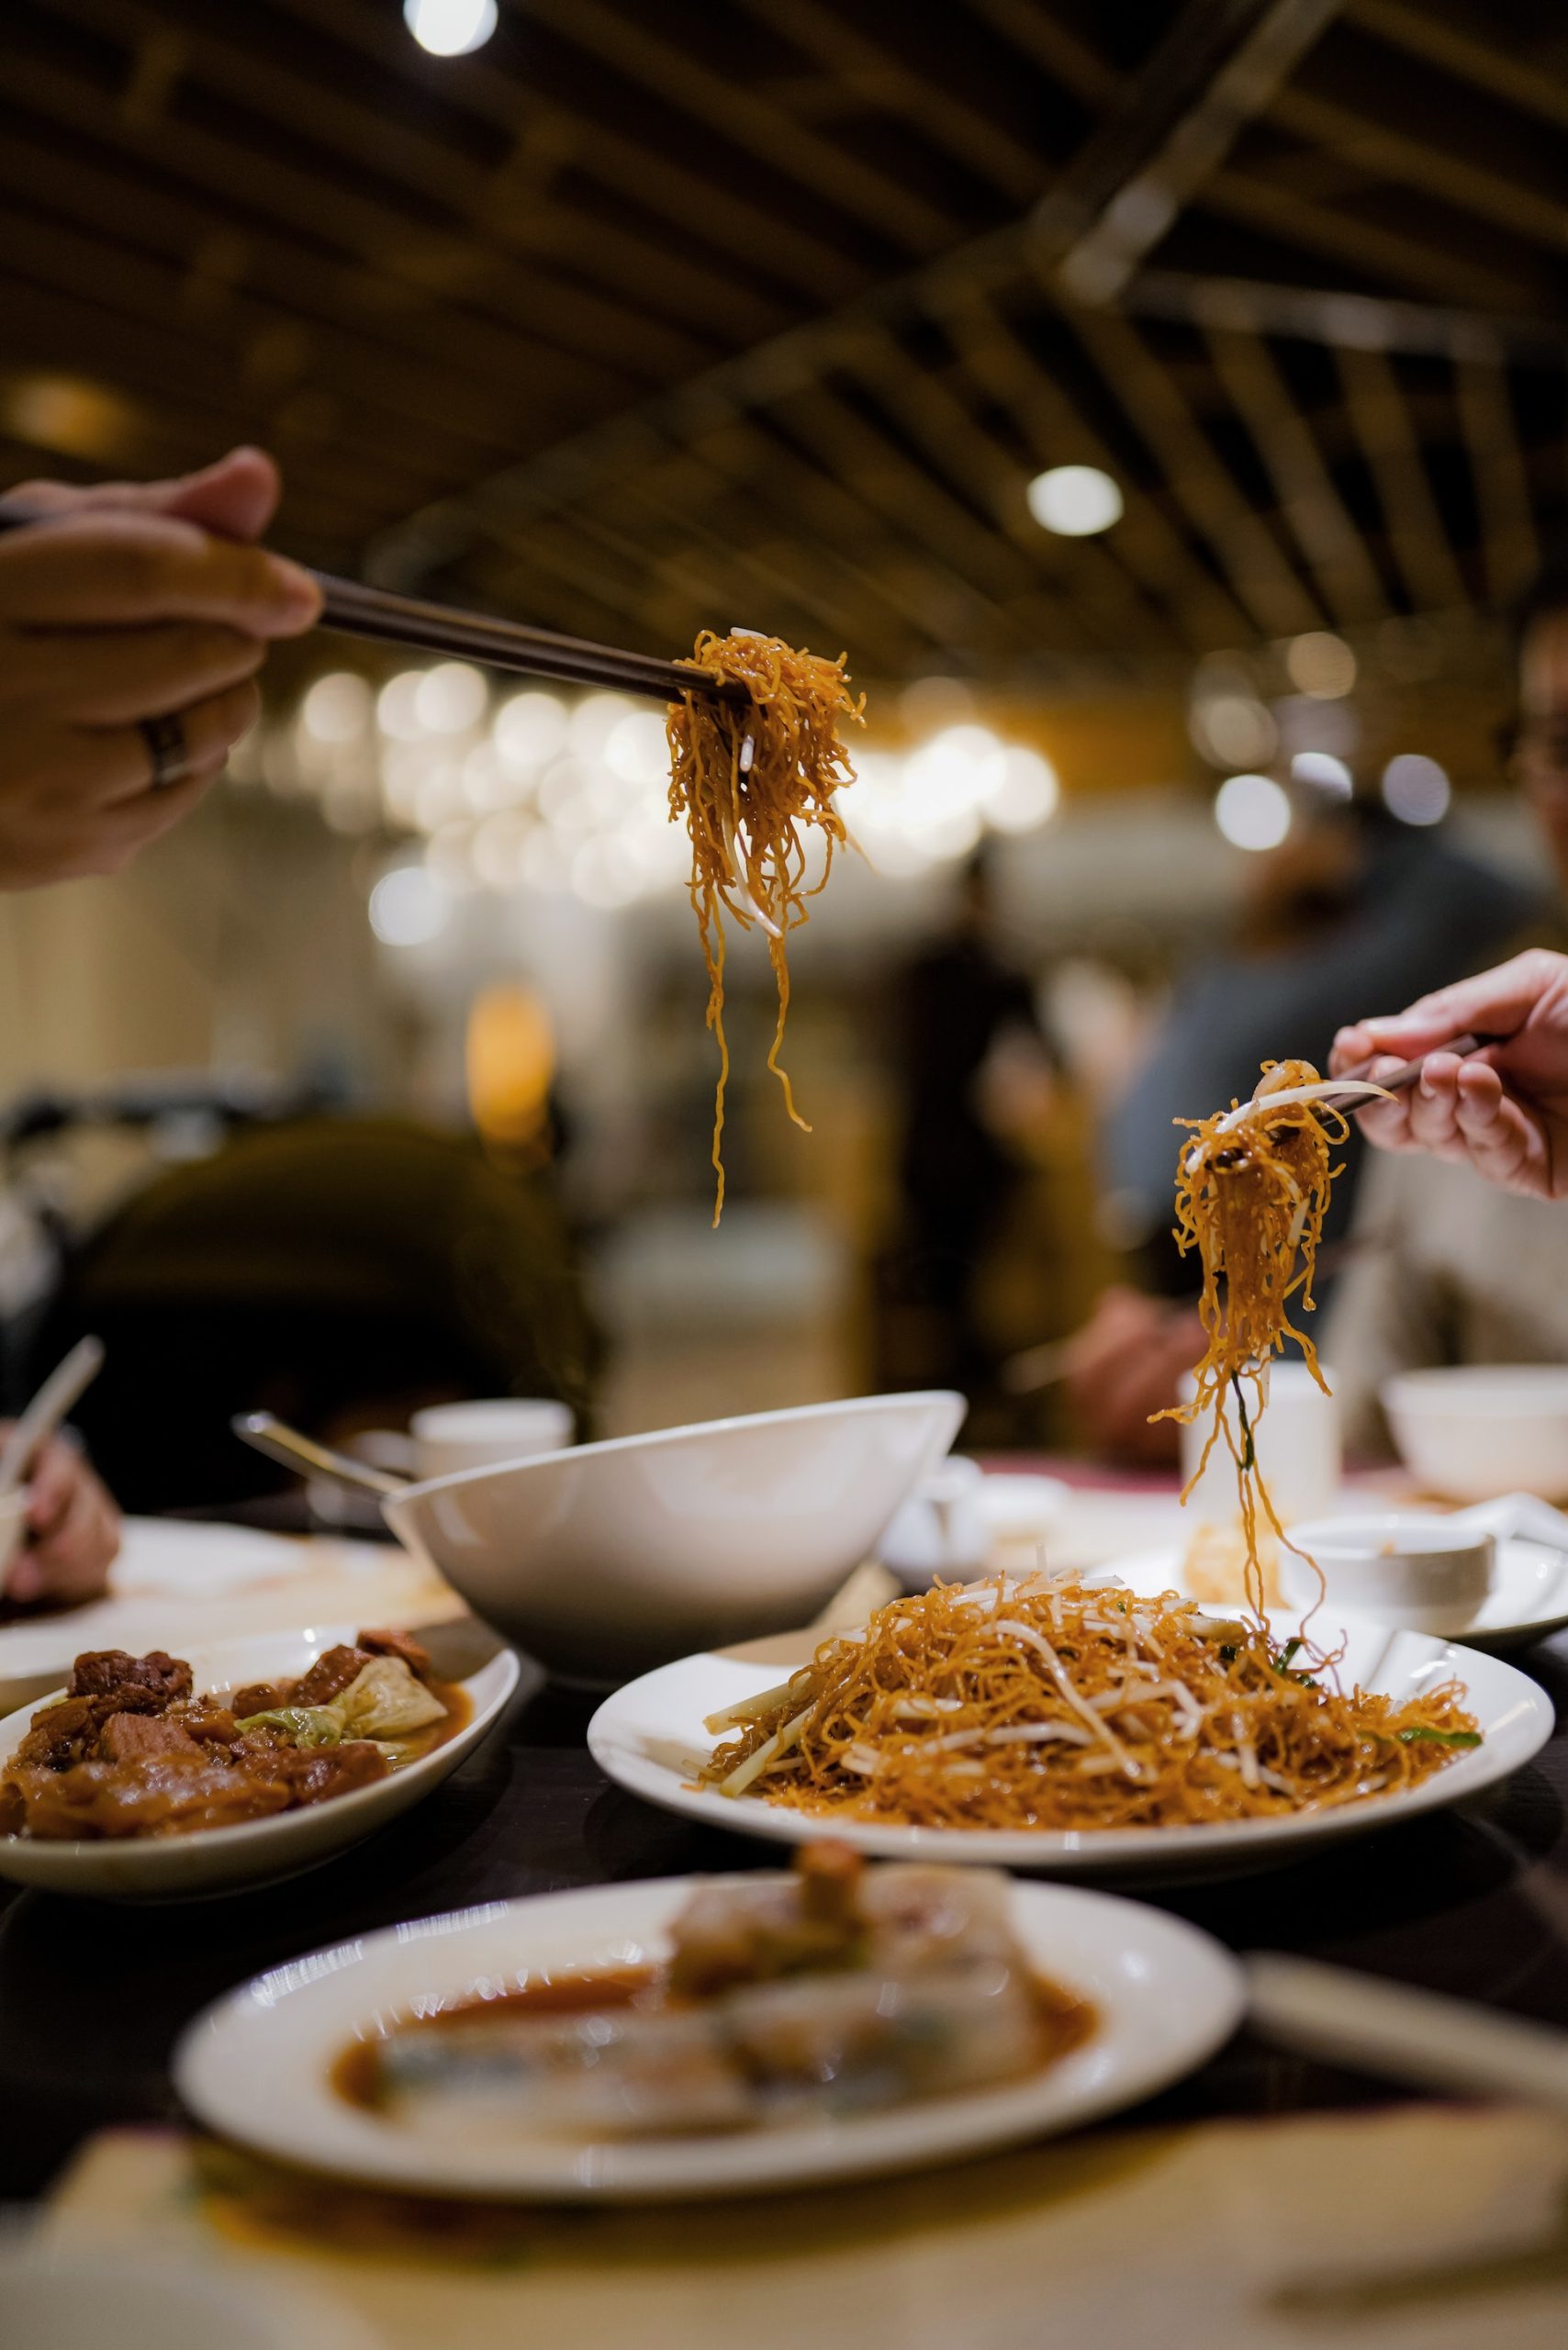 Best Chinese restaurants Dallas Top Chinese cuisine in Dallas Authentic Chinese food Dallas Chinese restaurants near me Delicious Chinese dishes Dallas Chinese takeout Dallas Chinese delivery Dallas Chinese restaurant reviews Popular Chinese eateries Dallas